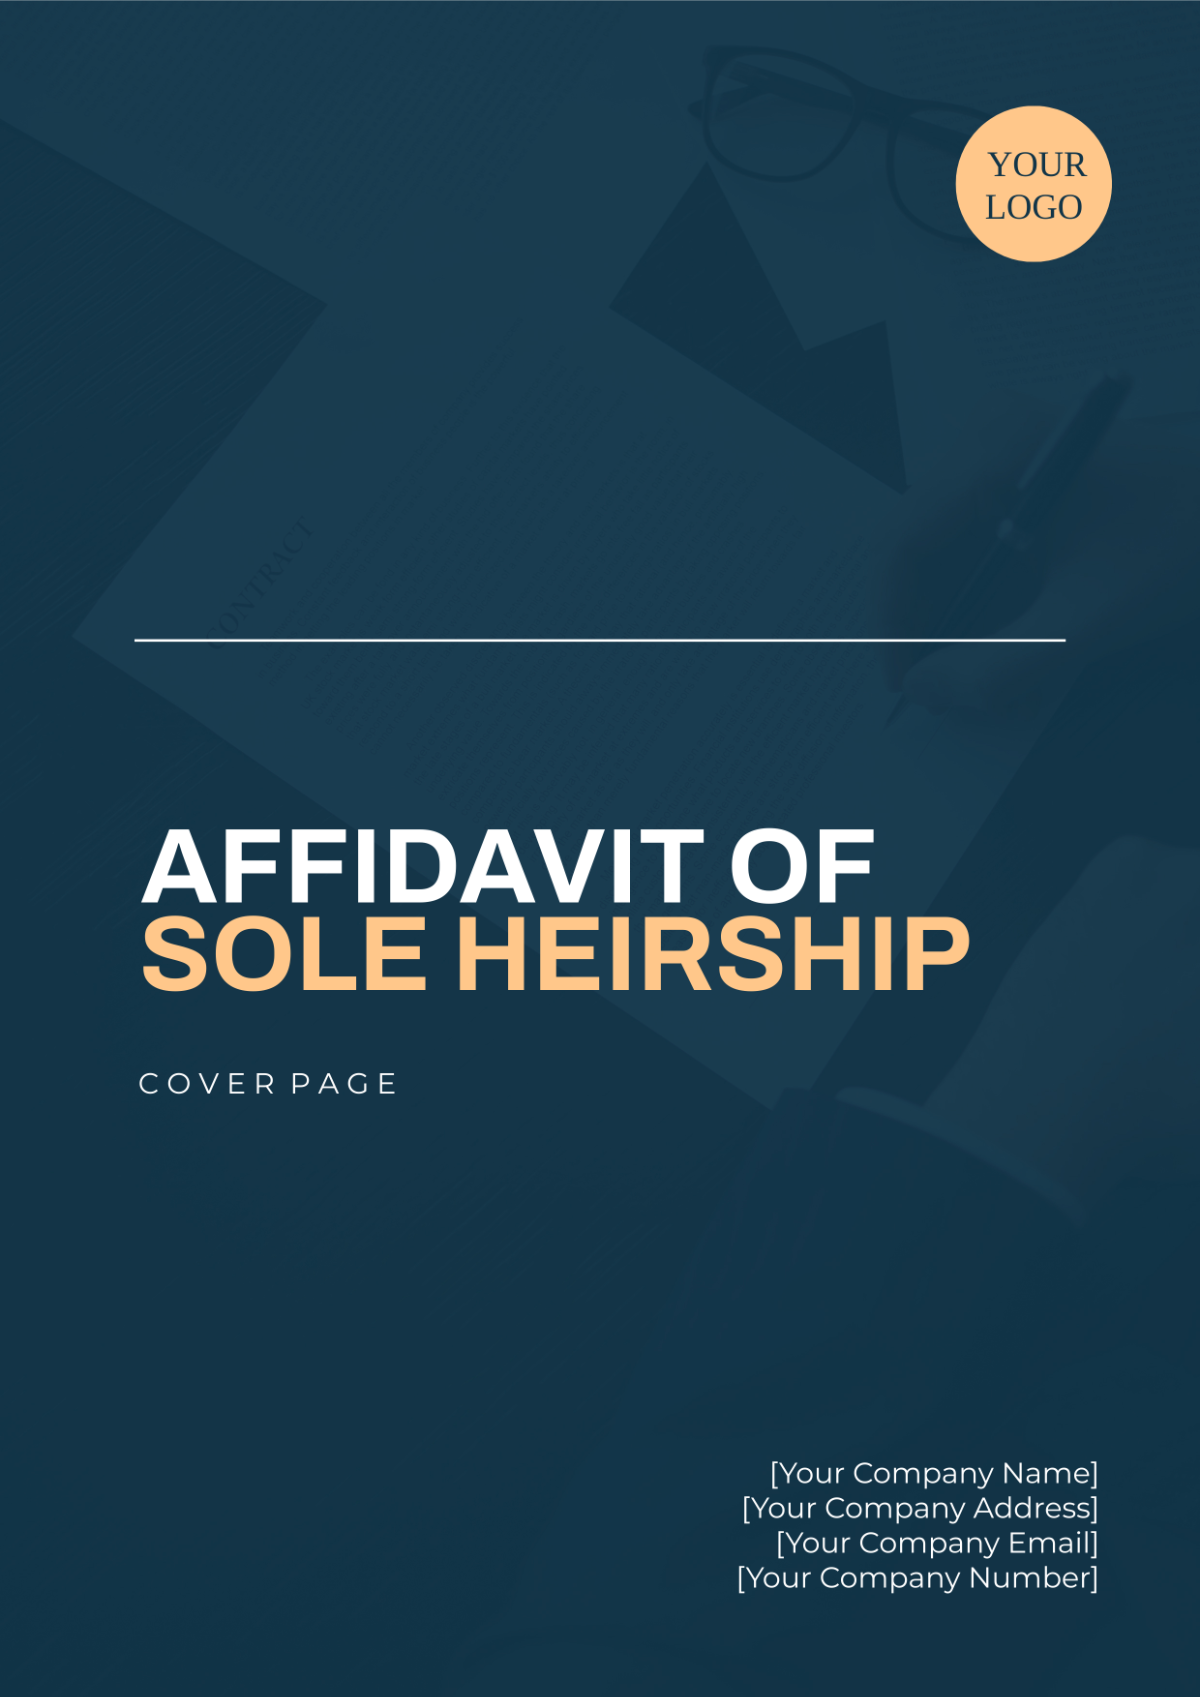 Affidavit of Sole Heirship Cover Page